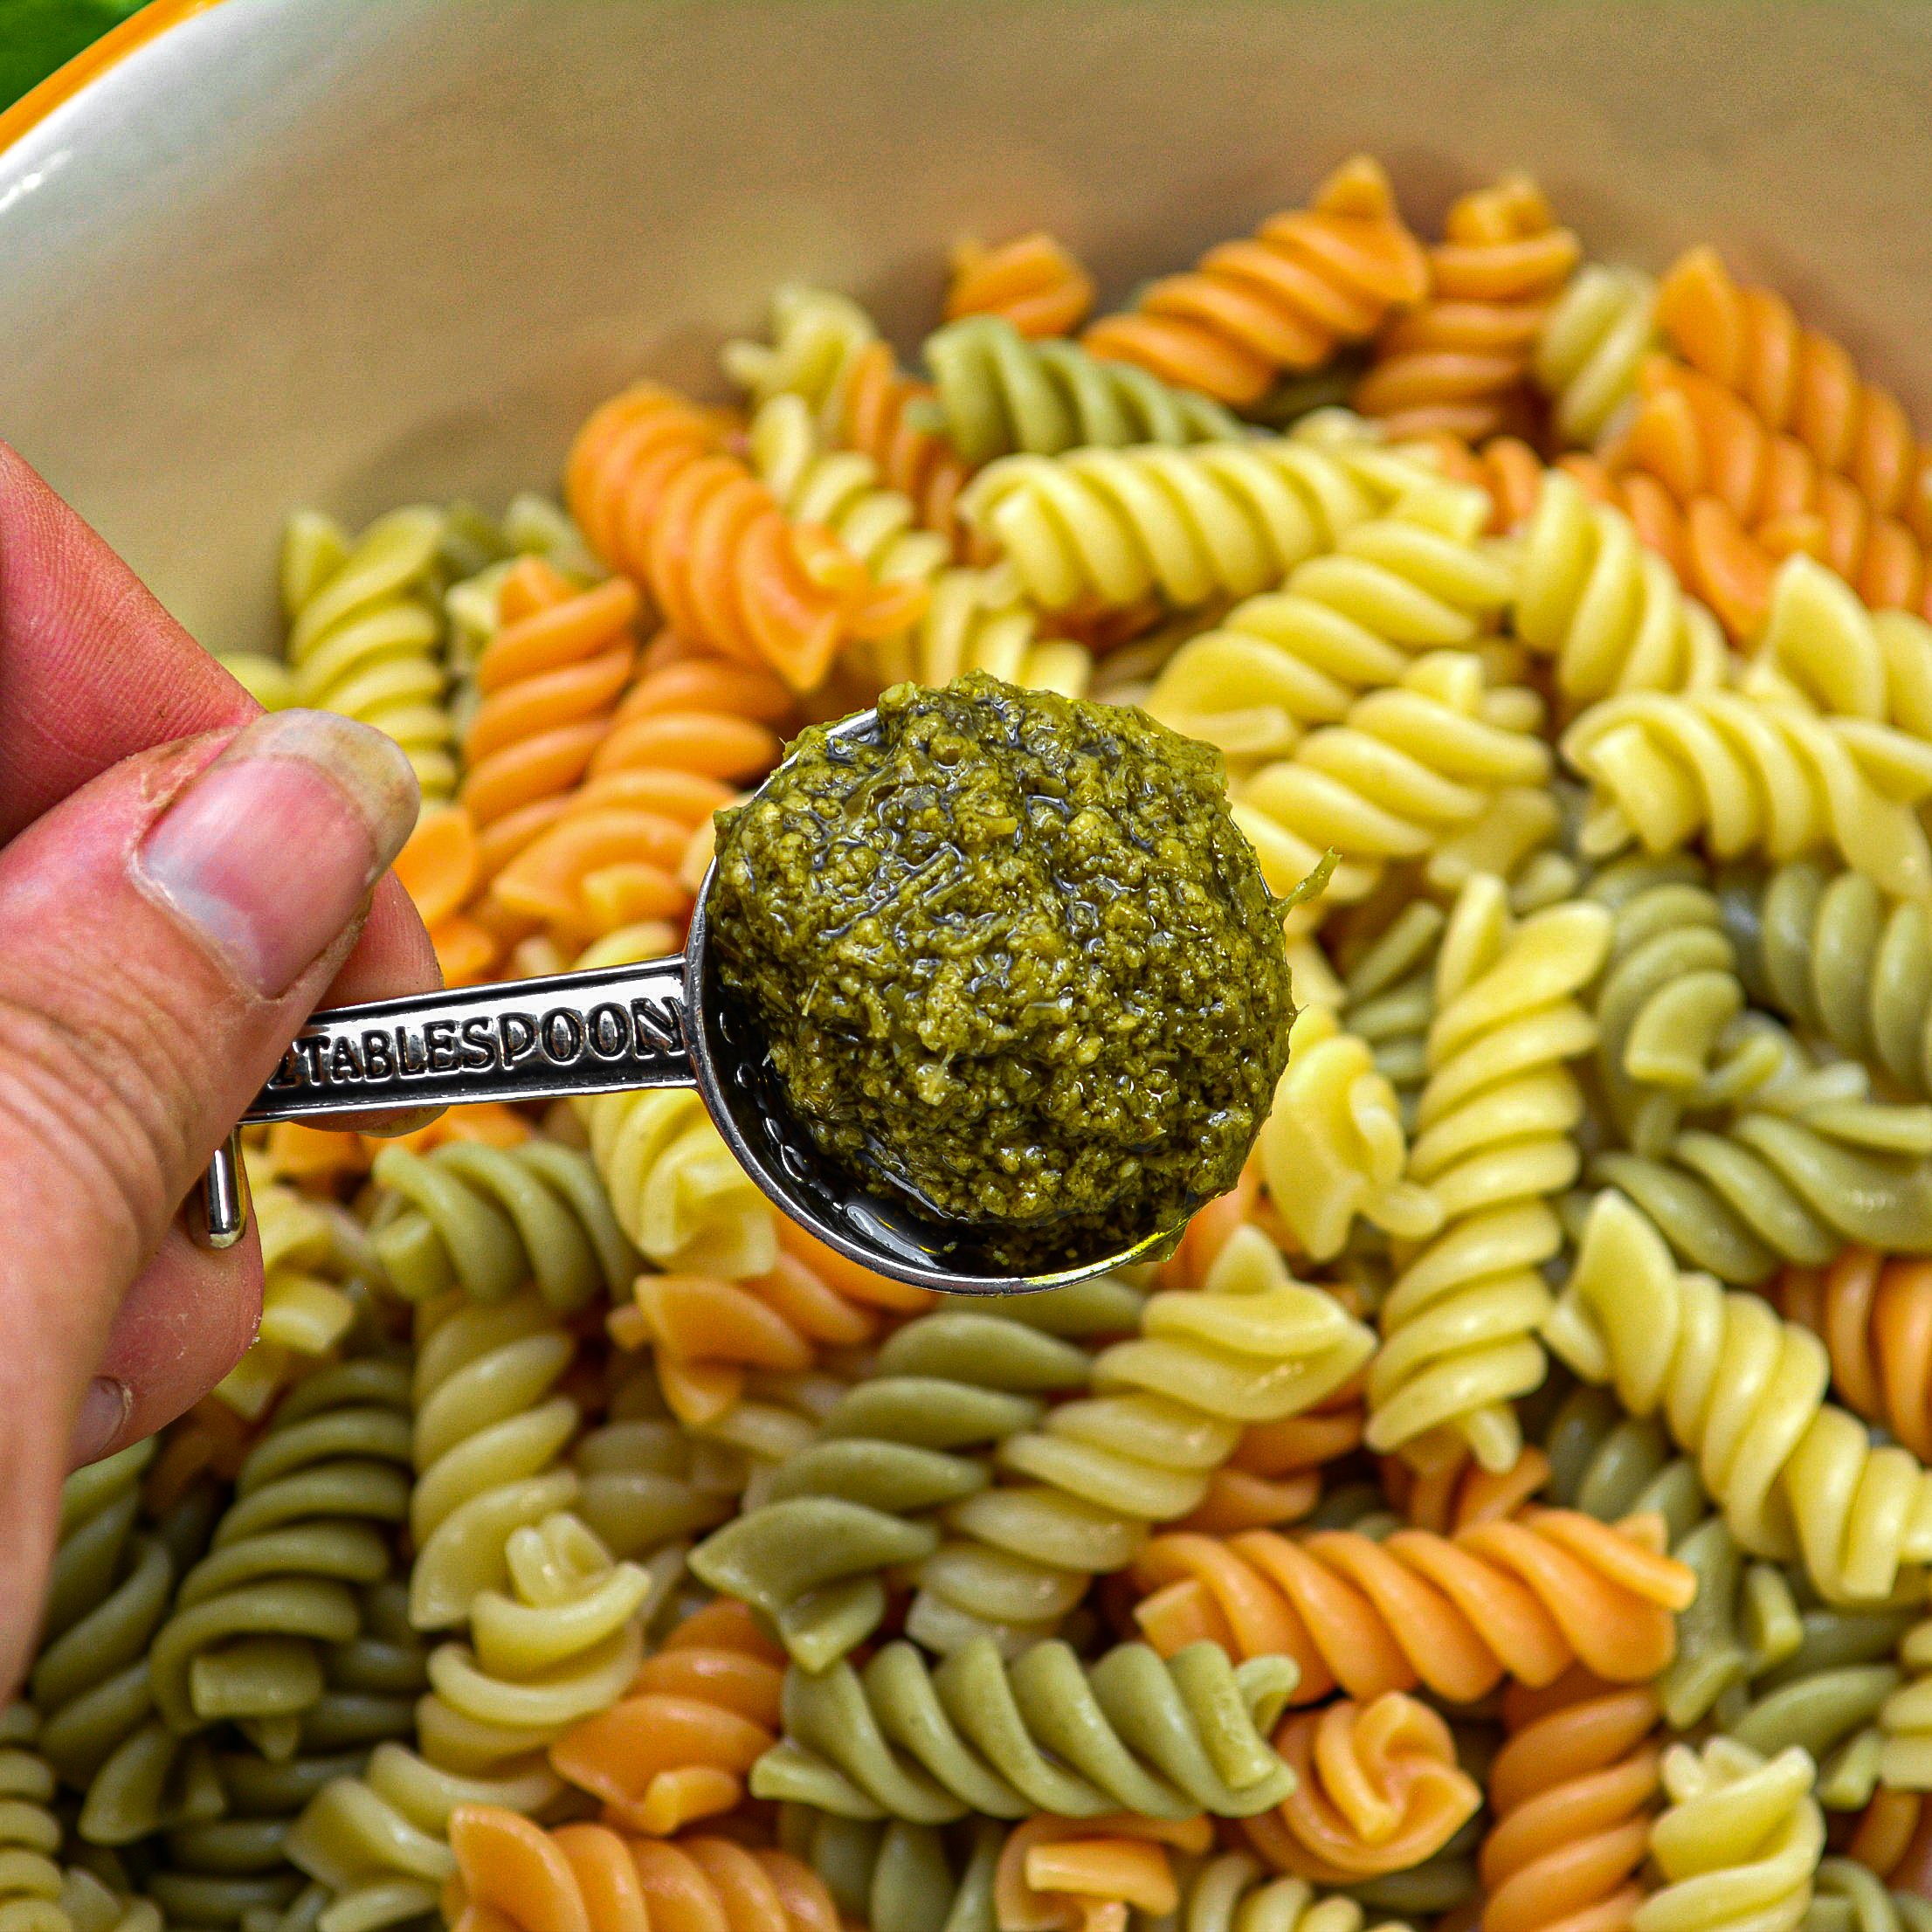 Mix in 3 tablespoons of pesto sauce.